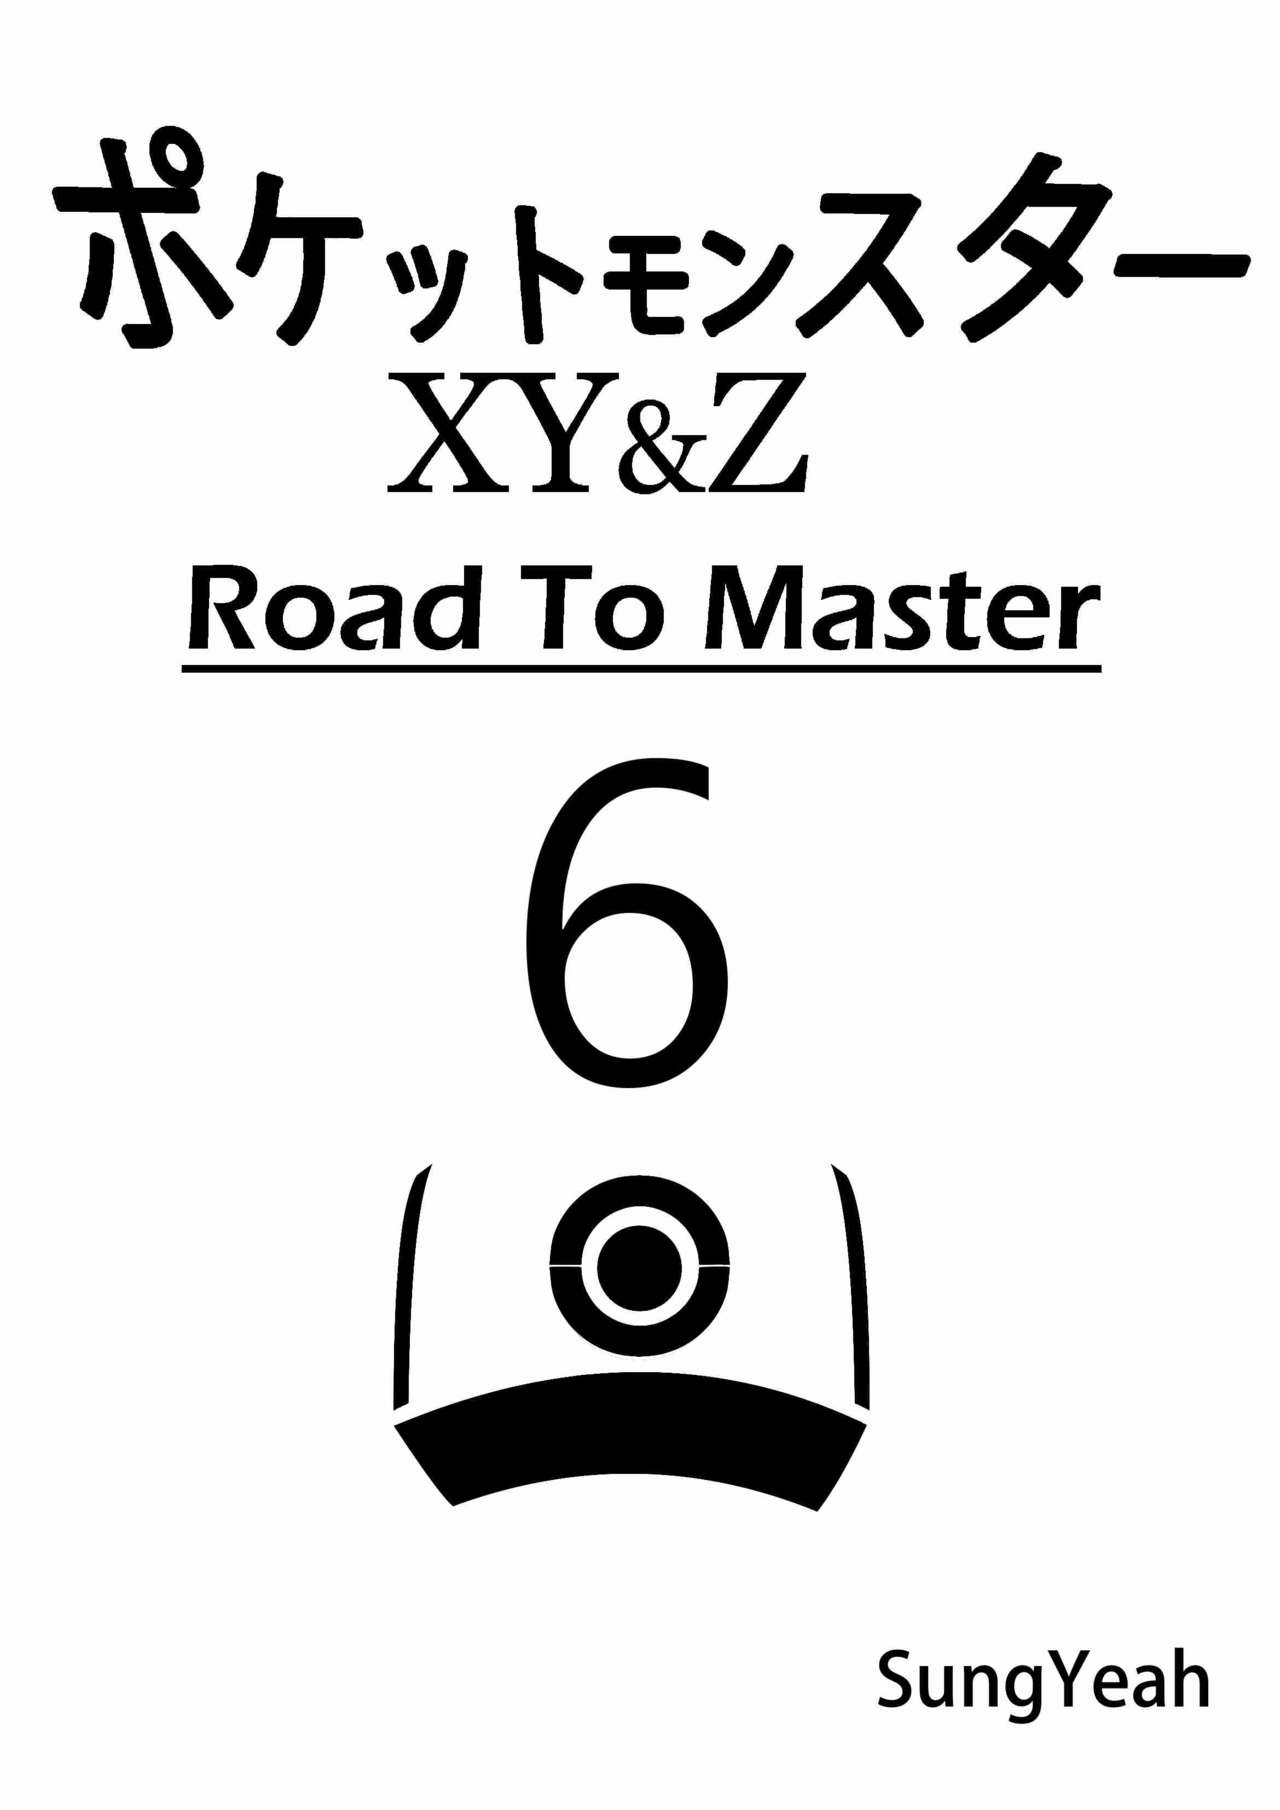 [Sungyeah] Pokemon - Road to Master - Complete 123